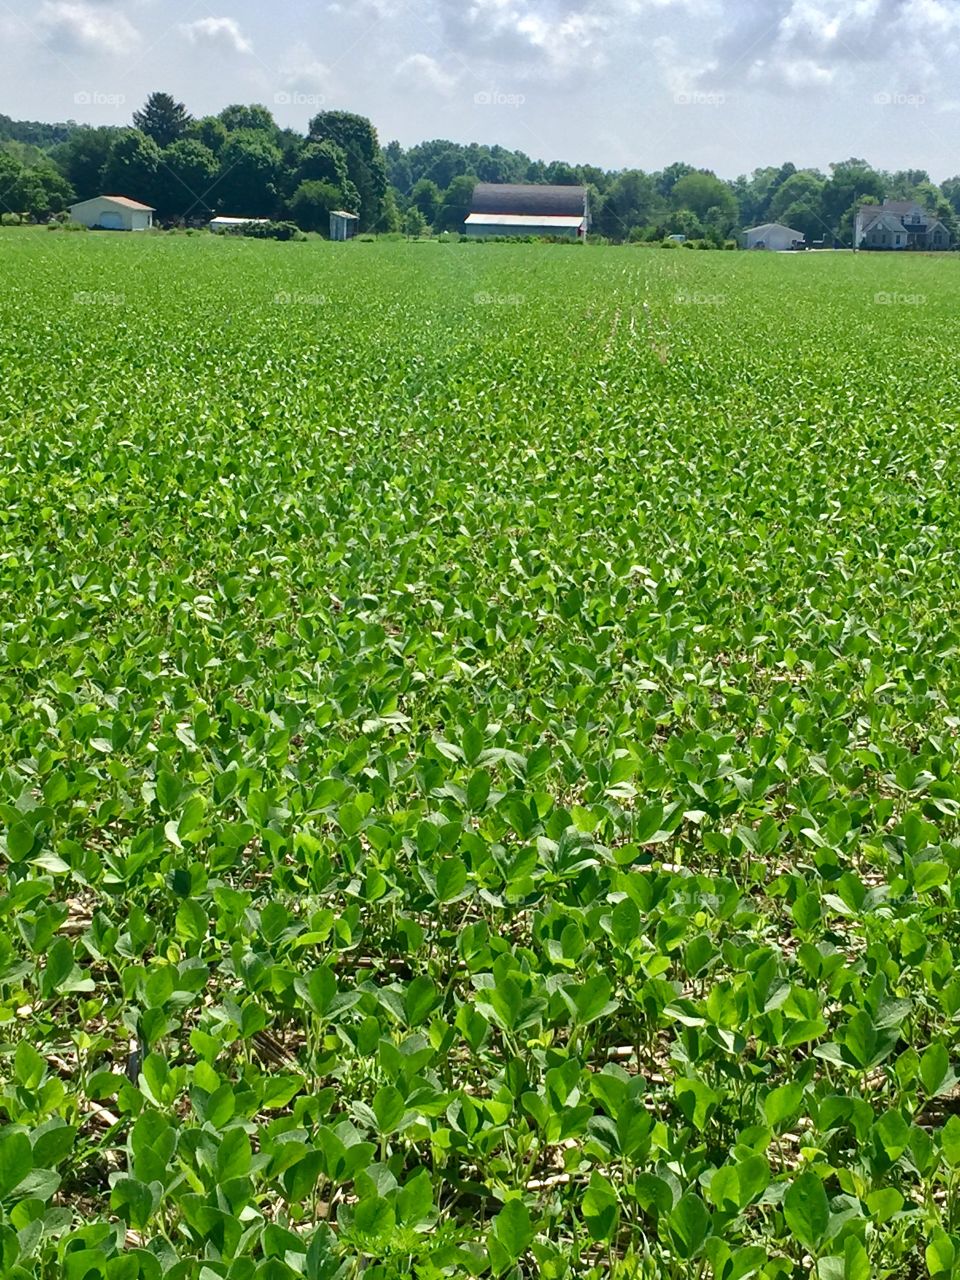 Ohio  Field of Soy Beans